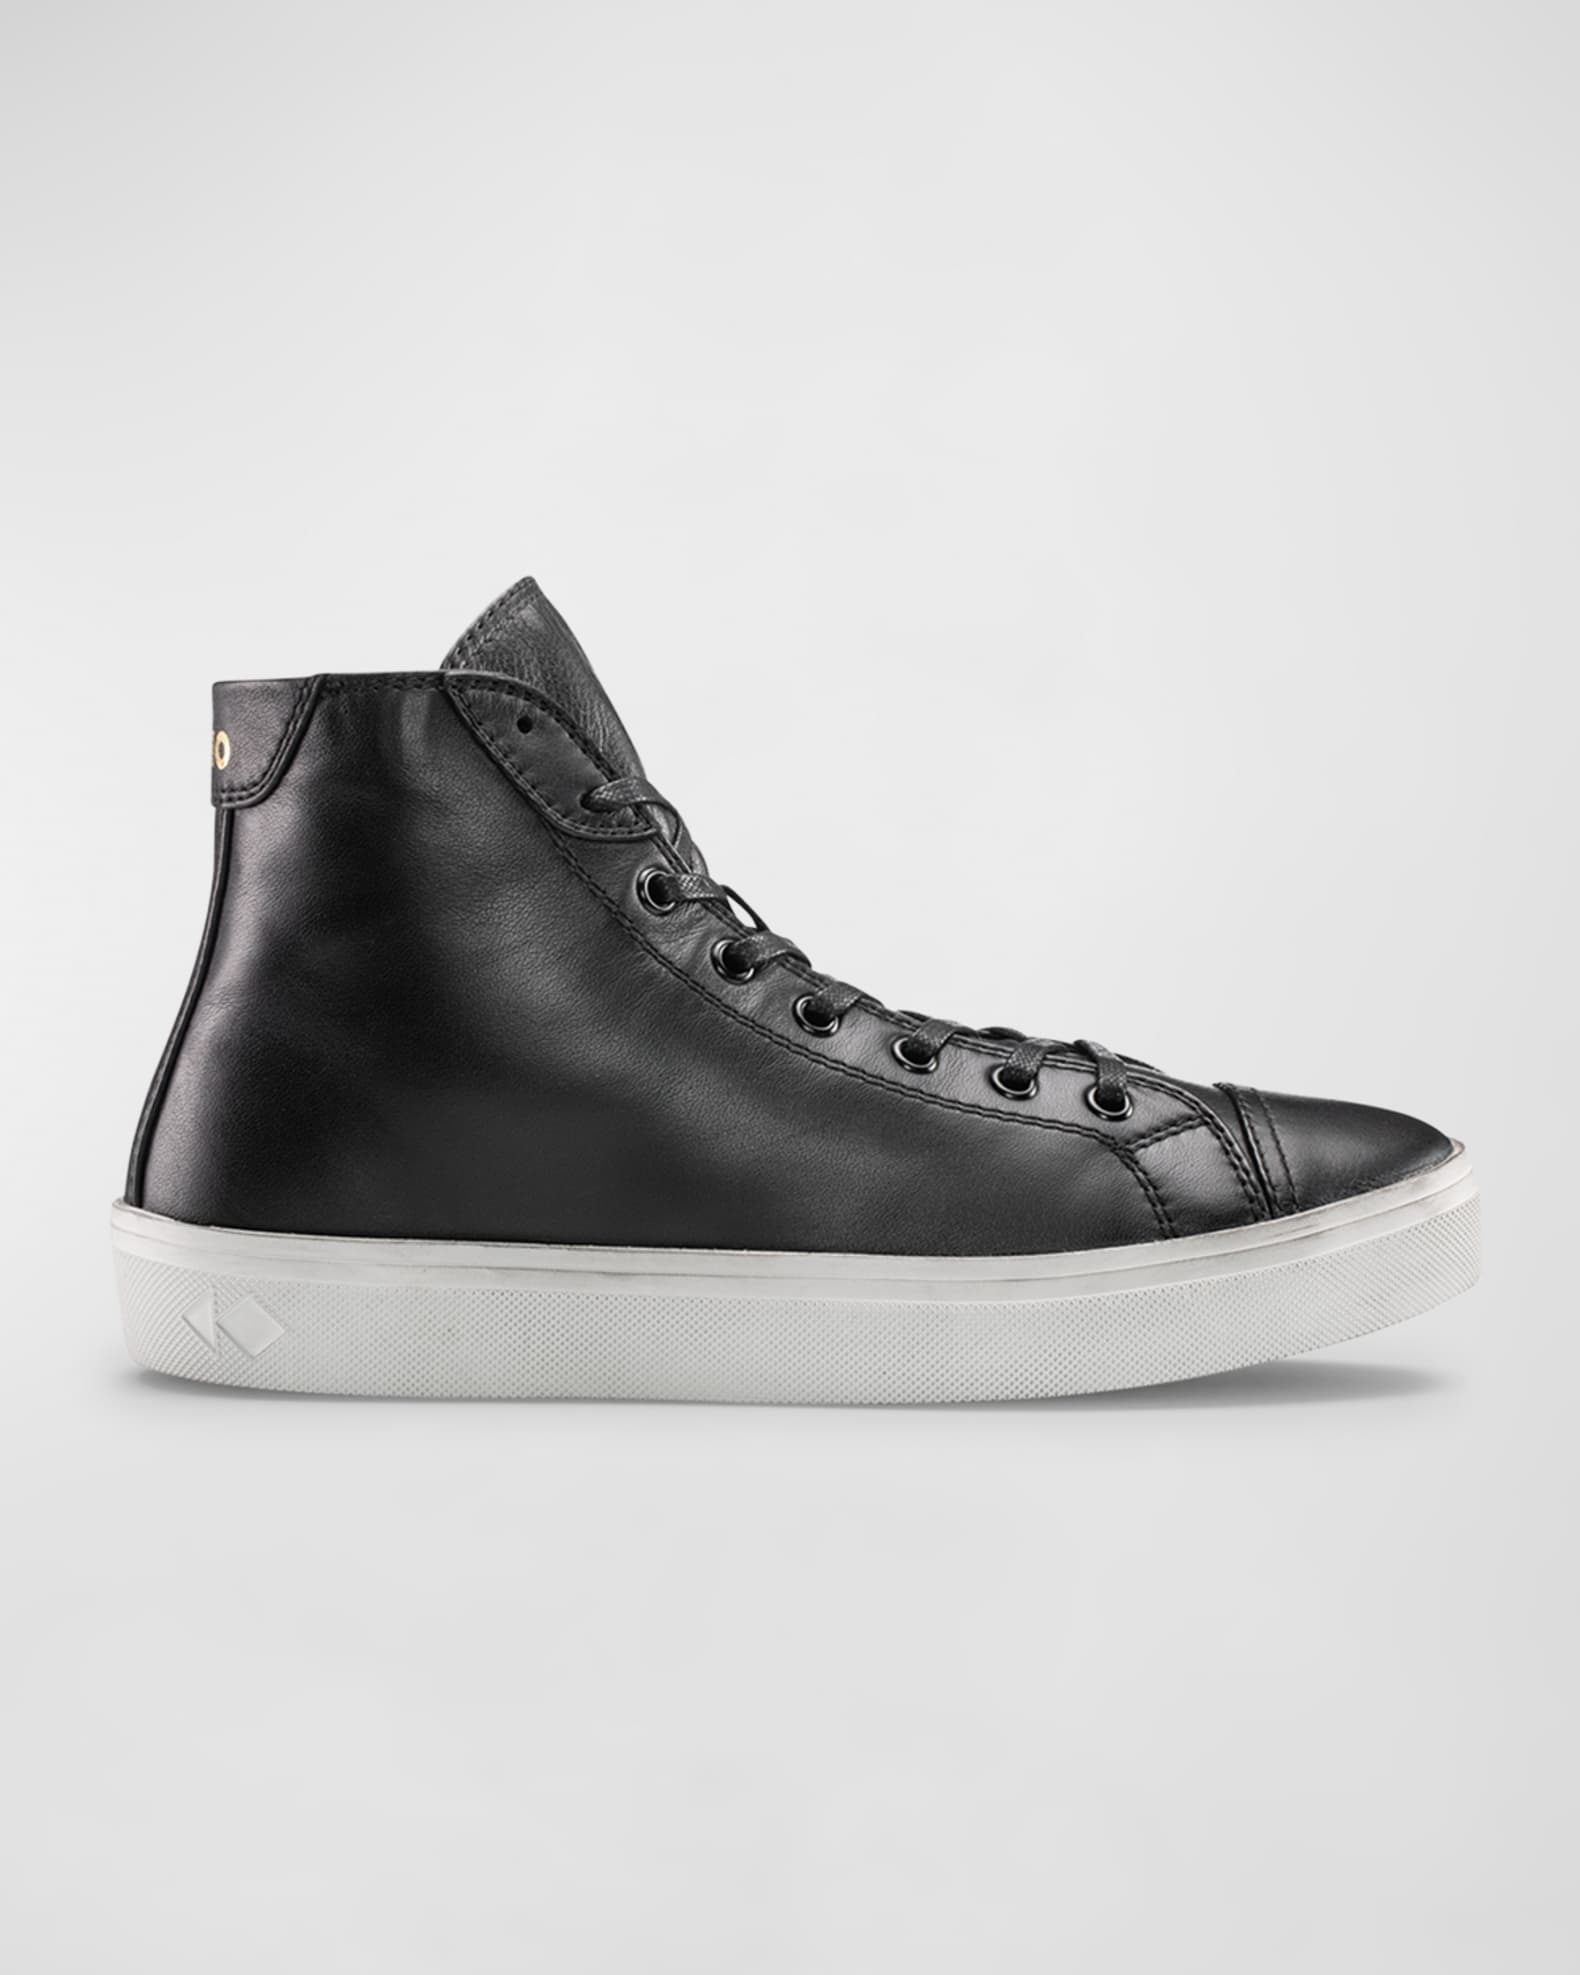 Koio Men's Court Distressed-Sole Leather High-Top Sneakers | Neiman Marcus